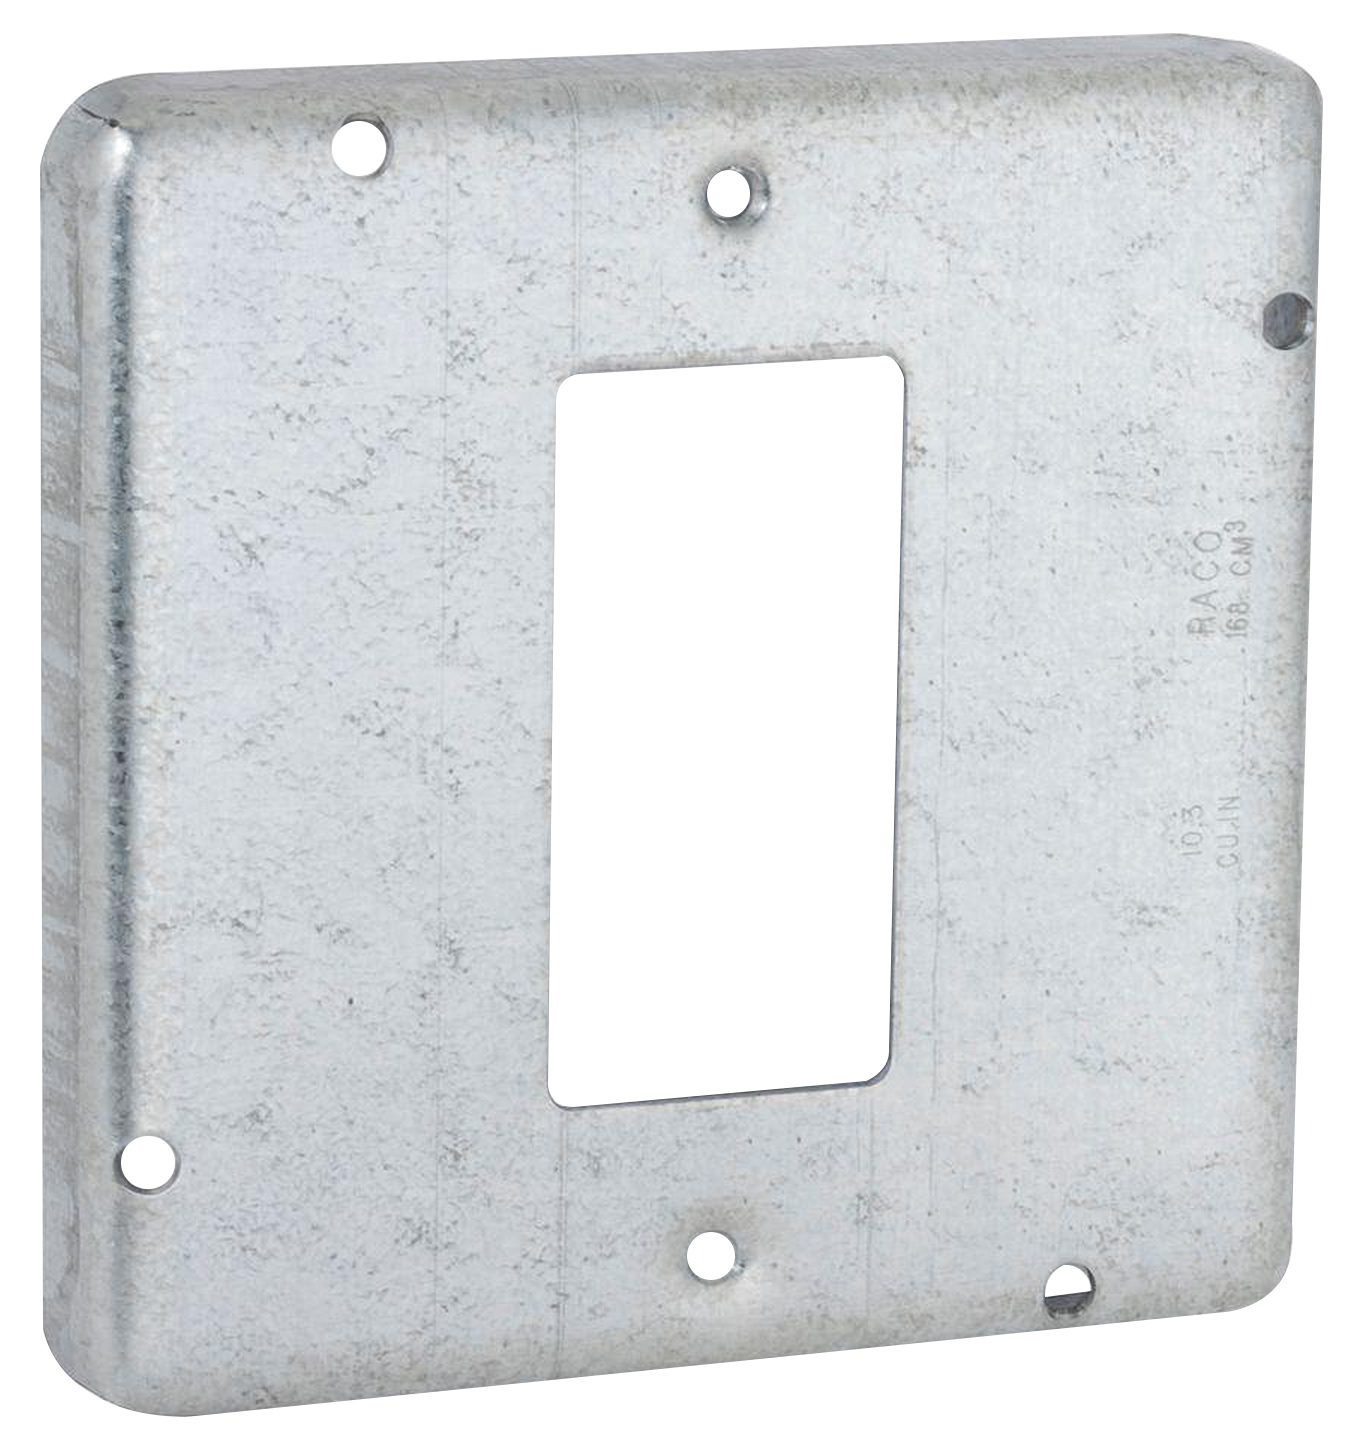 00856 4.68 In. Steel Single Gfci Square Exposed Work Cover